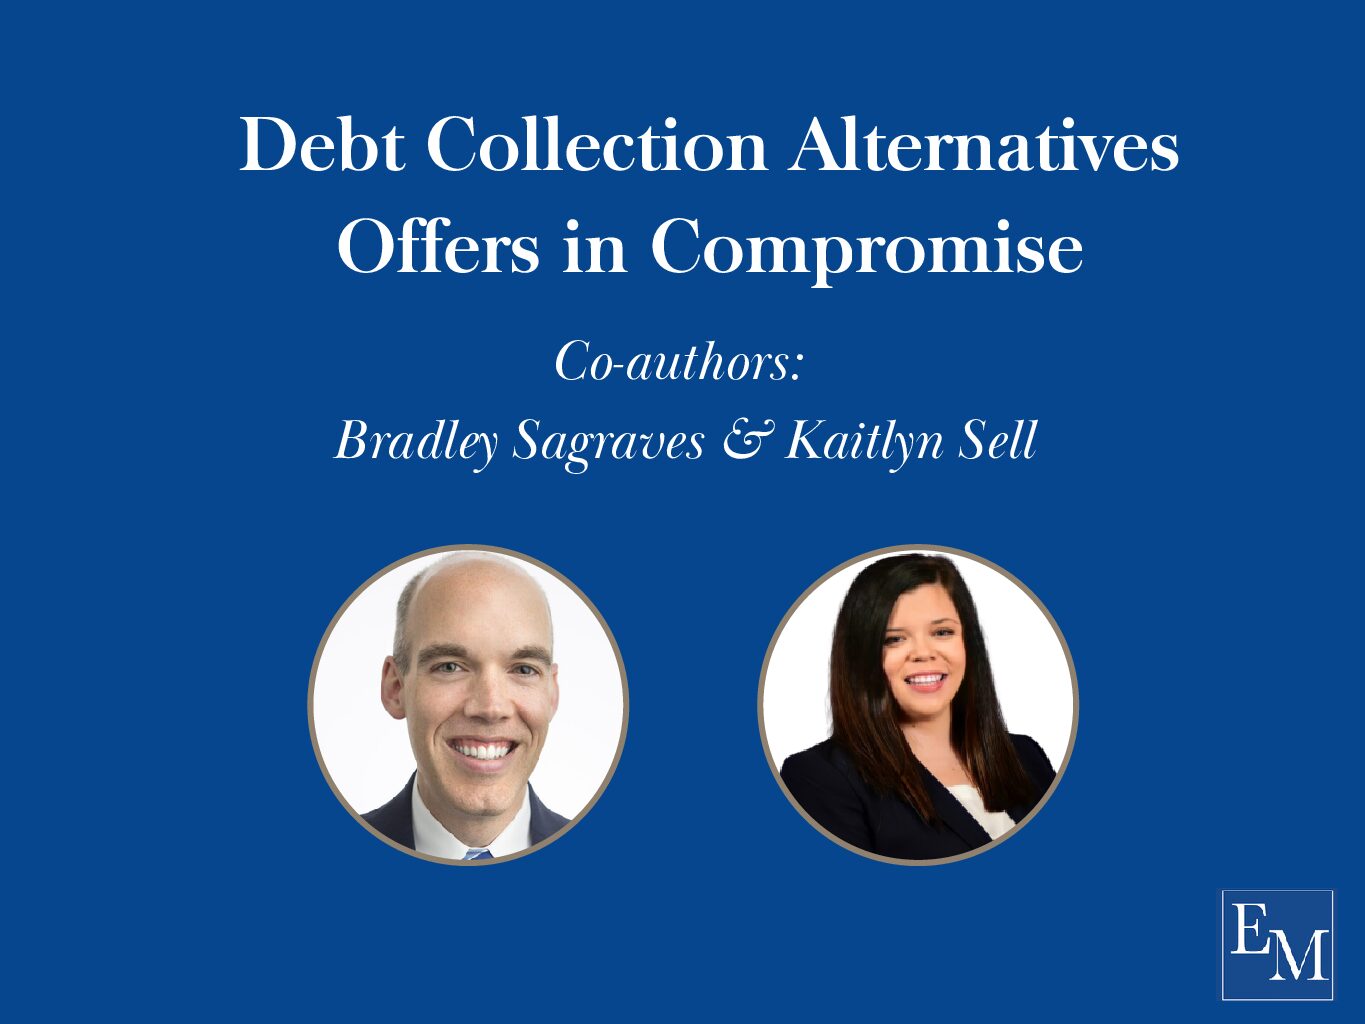 Offers in Compromise – Debt Collection Alternatives